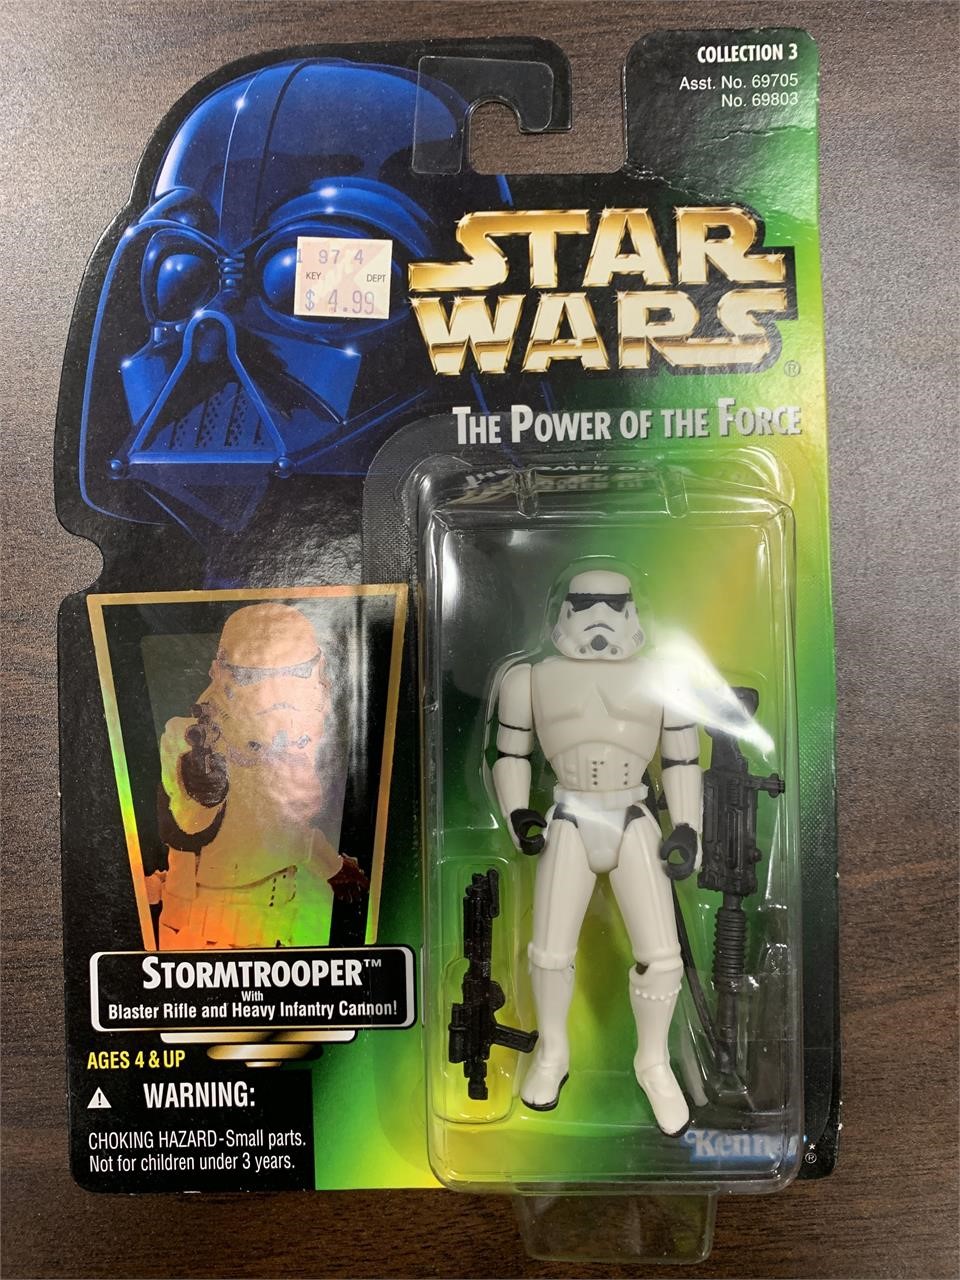 Star Wars unsigned Stormtrooper action figure